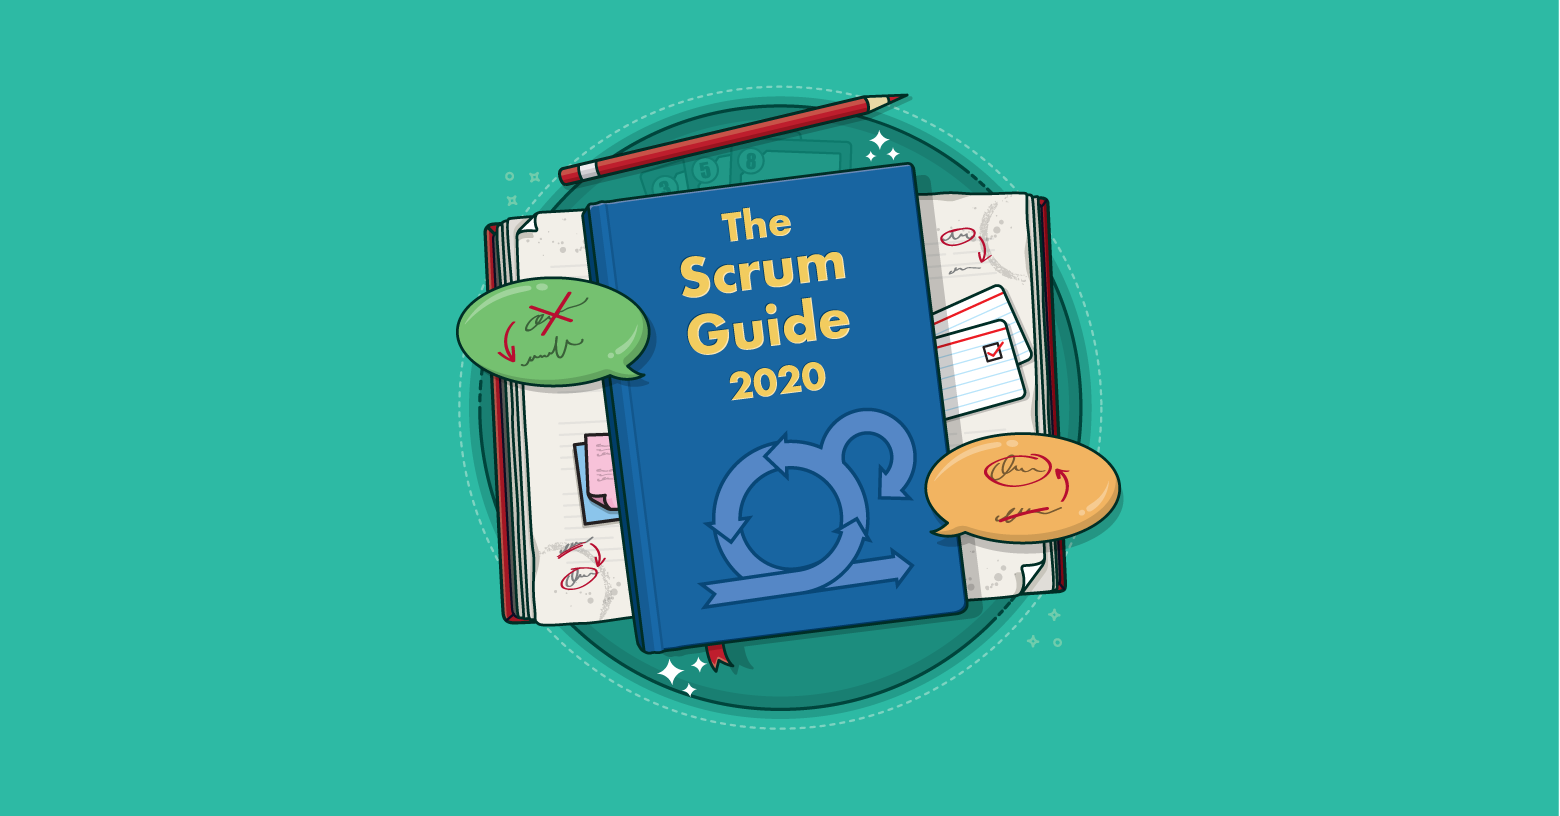 Top 5 changes in the 2020 version of the Scrum Guide